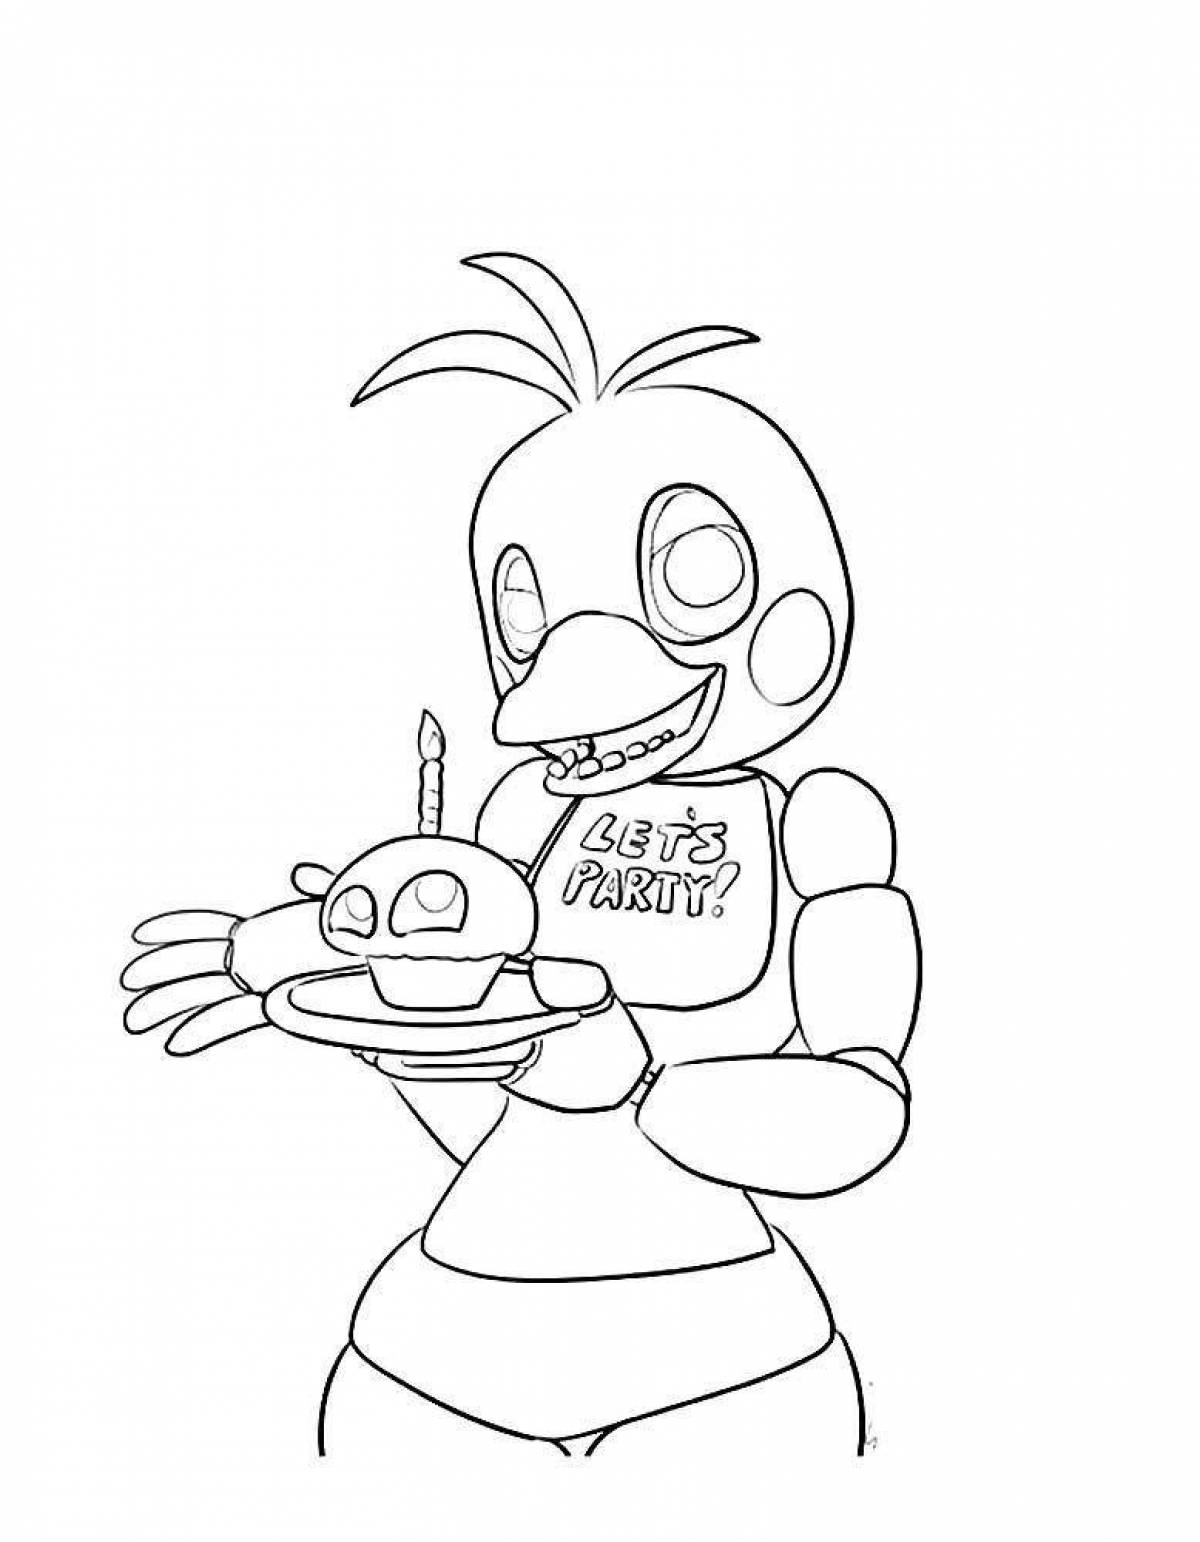 Chica's gorgeous animatronic coloring book